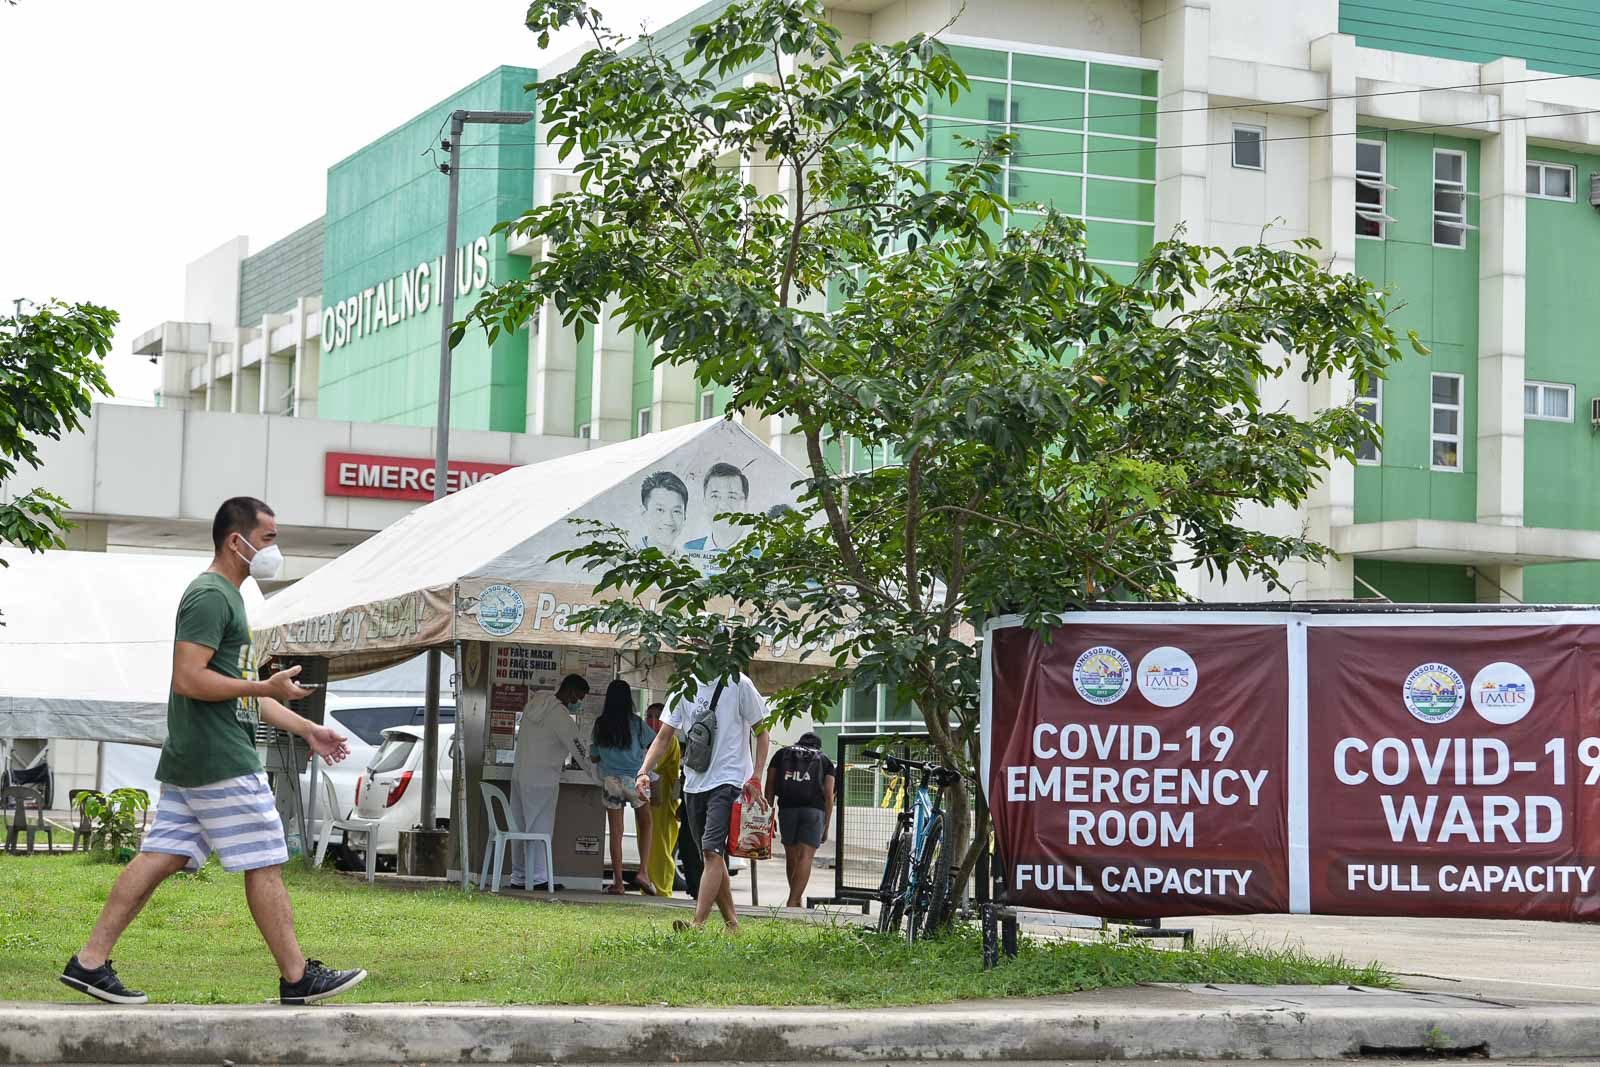 DOH reports zero new COVID-19 deaths for 2 days, citing ‘technical issues’